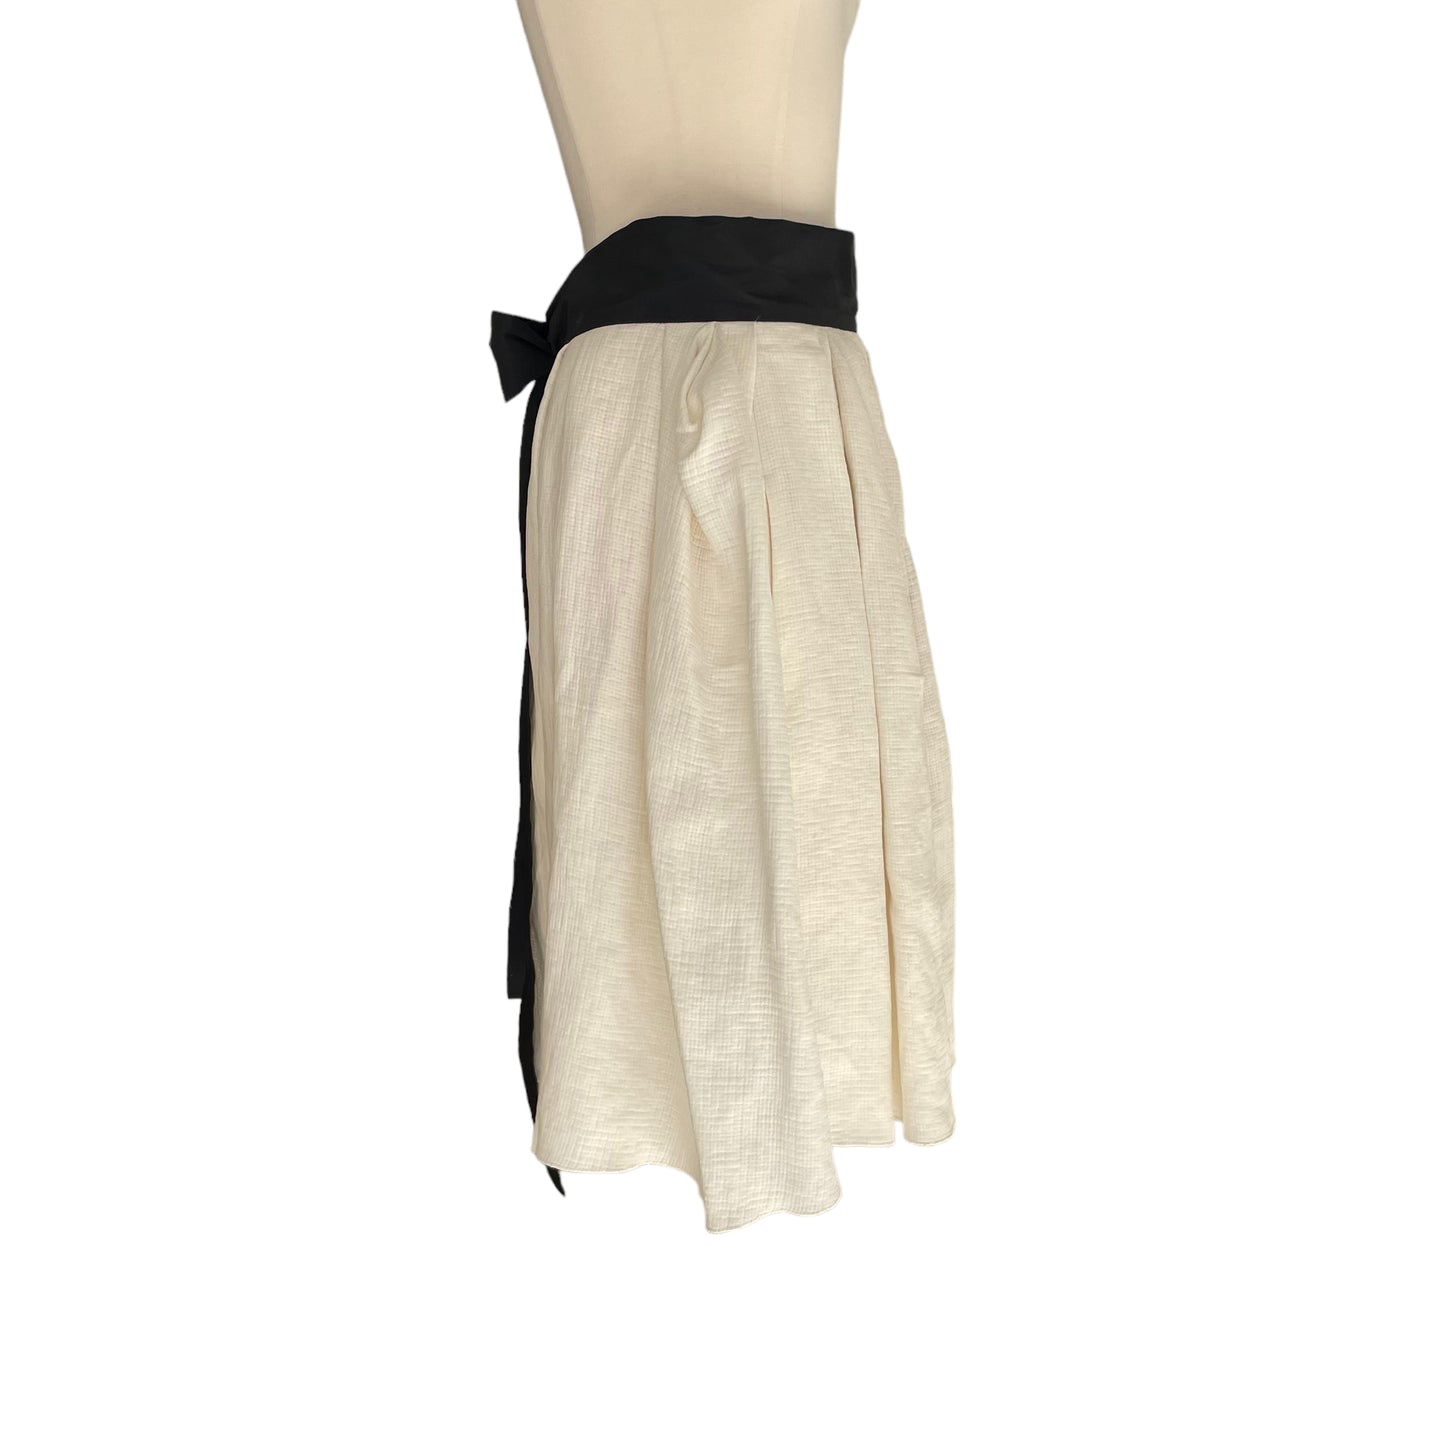 Cream and Black Bow Tie Skirt - S